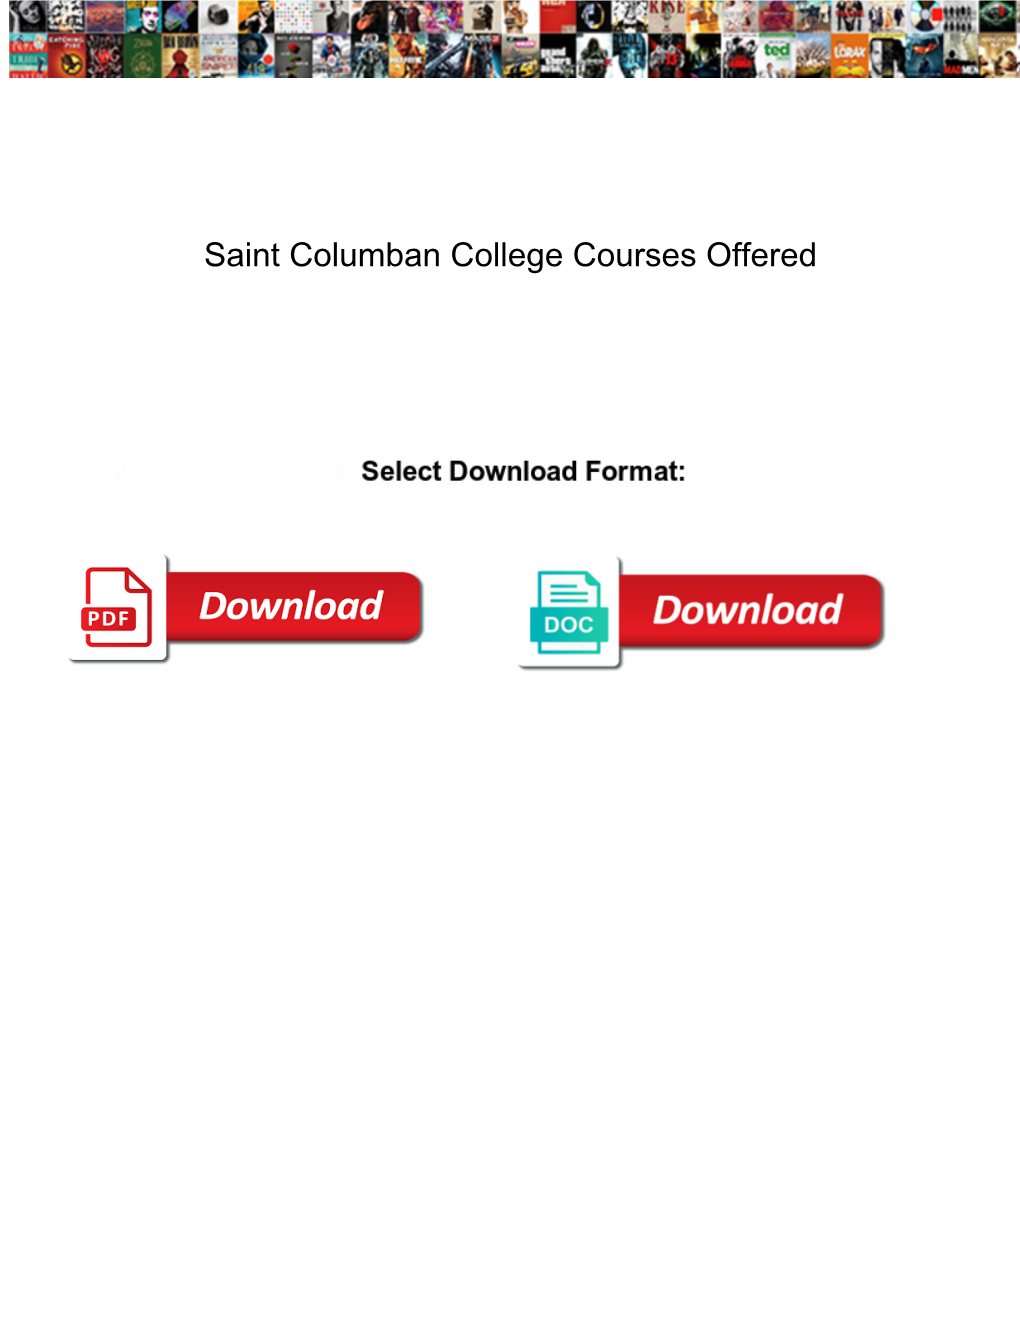 Saint Columban College Courses Offered